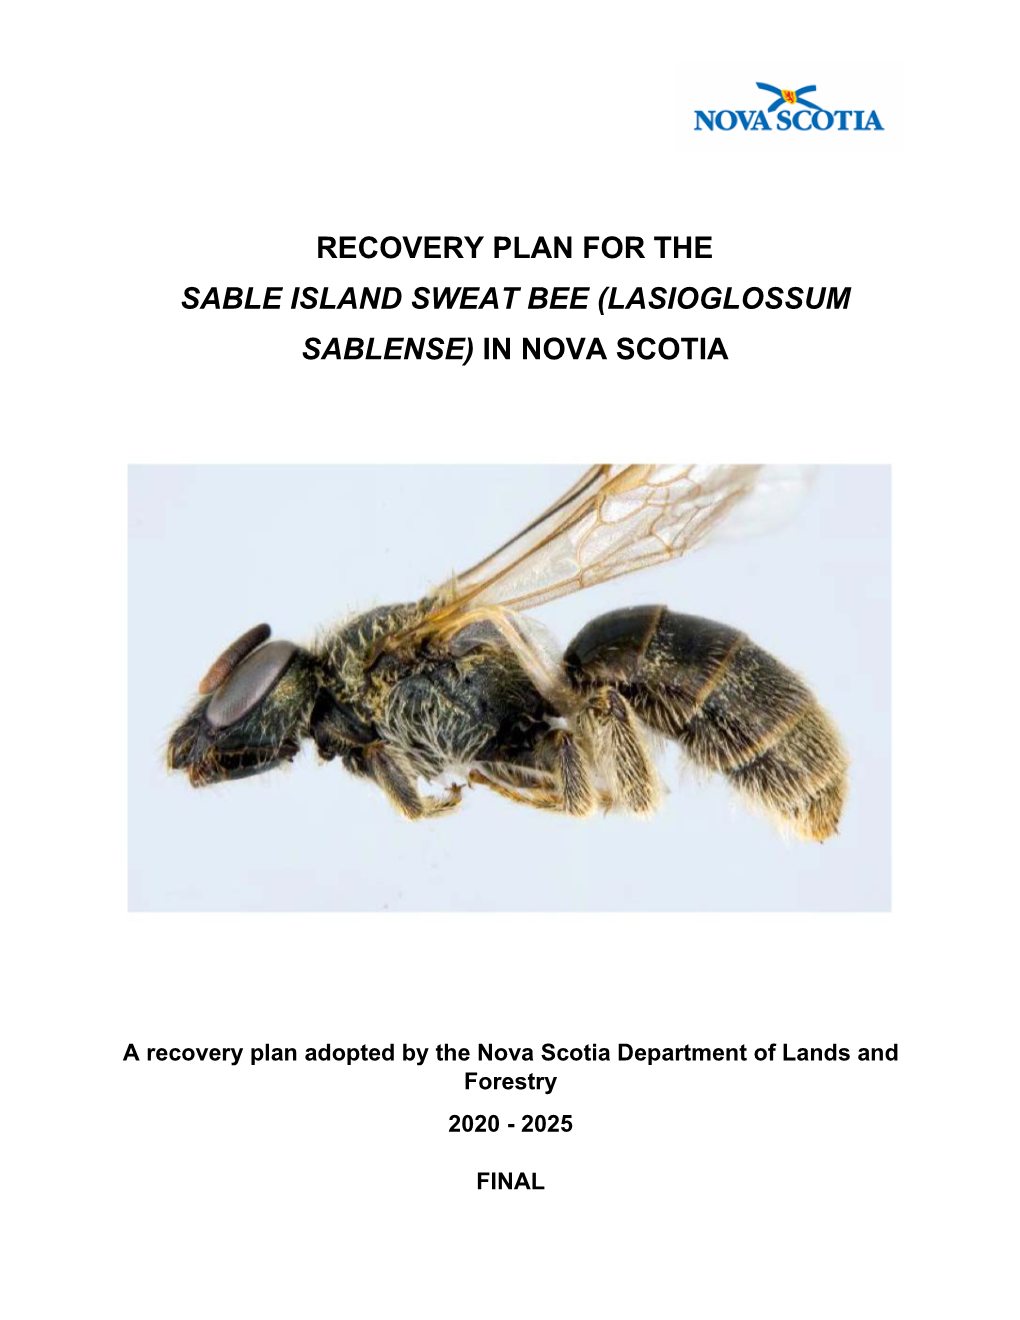 Recovery Plan for the Sable Island Sweat Bee (Lasioglossum Sablense) in Nova Scotia